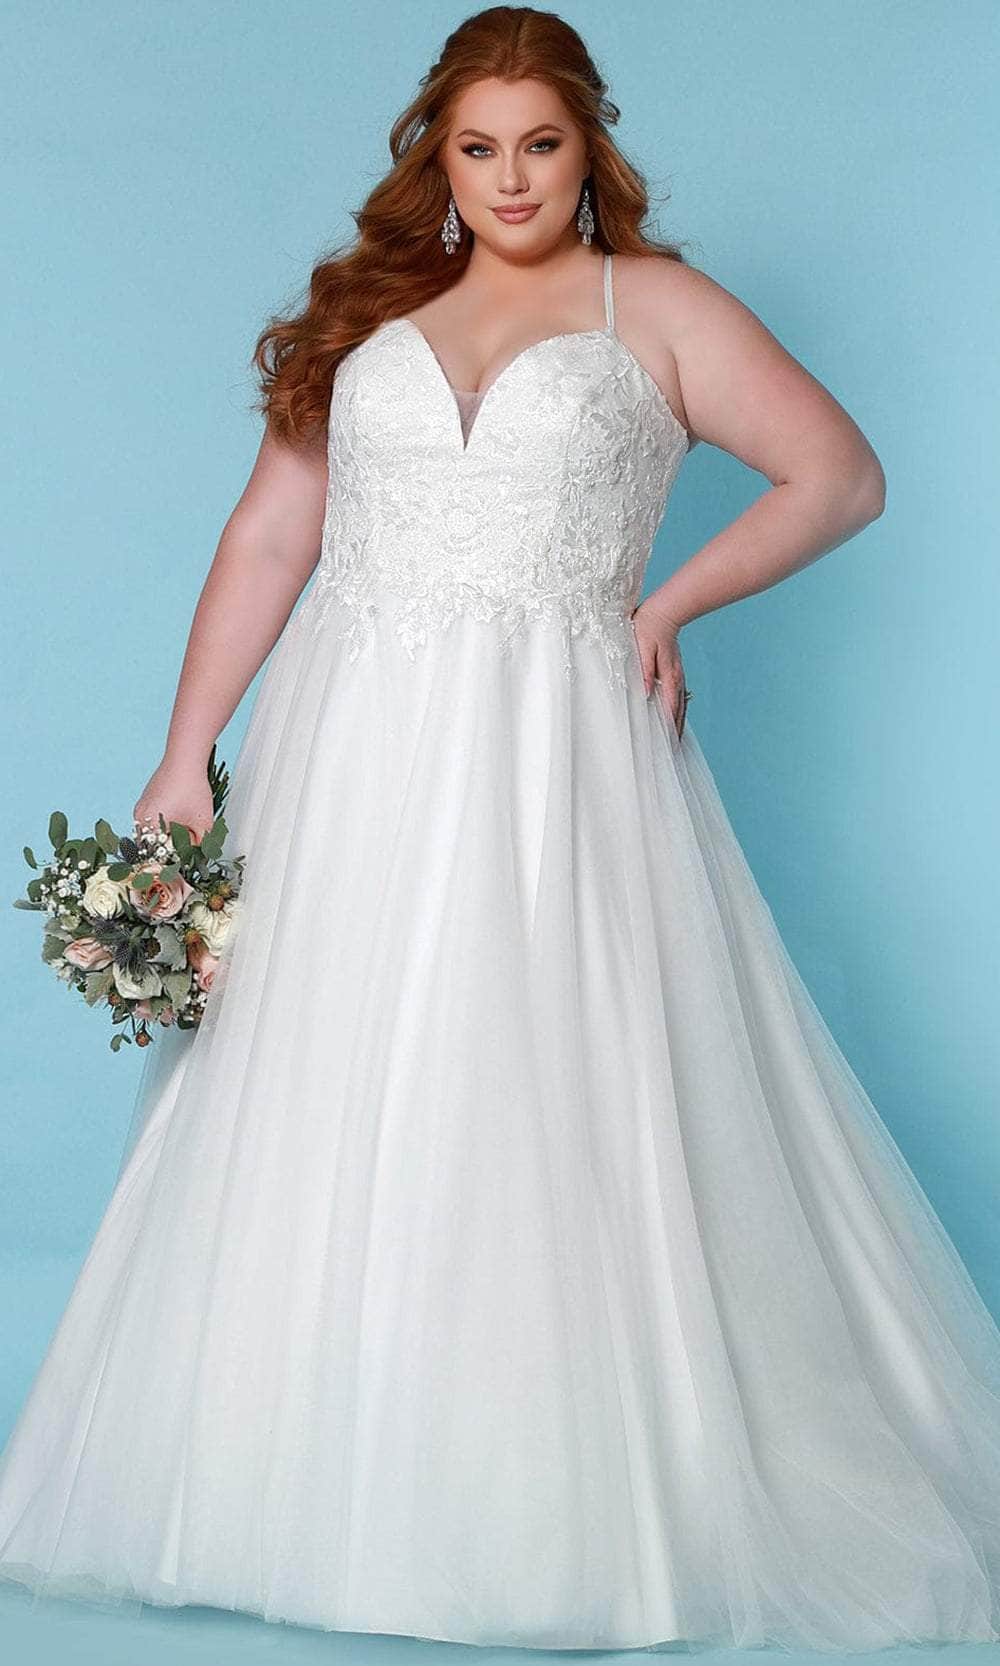 Sydney's Closet Bridal - SC5277 Sweetheart Embroidered Bridal Gown
